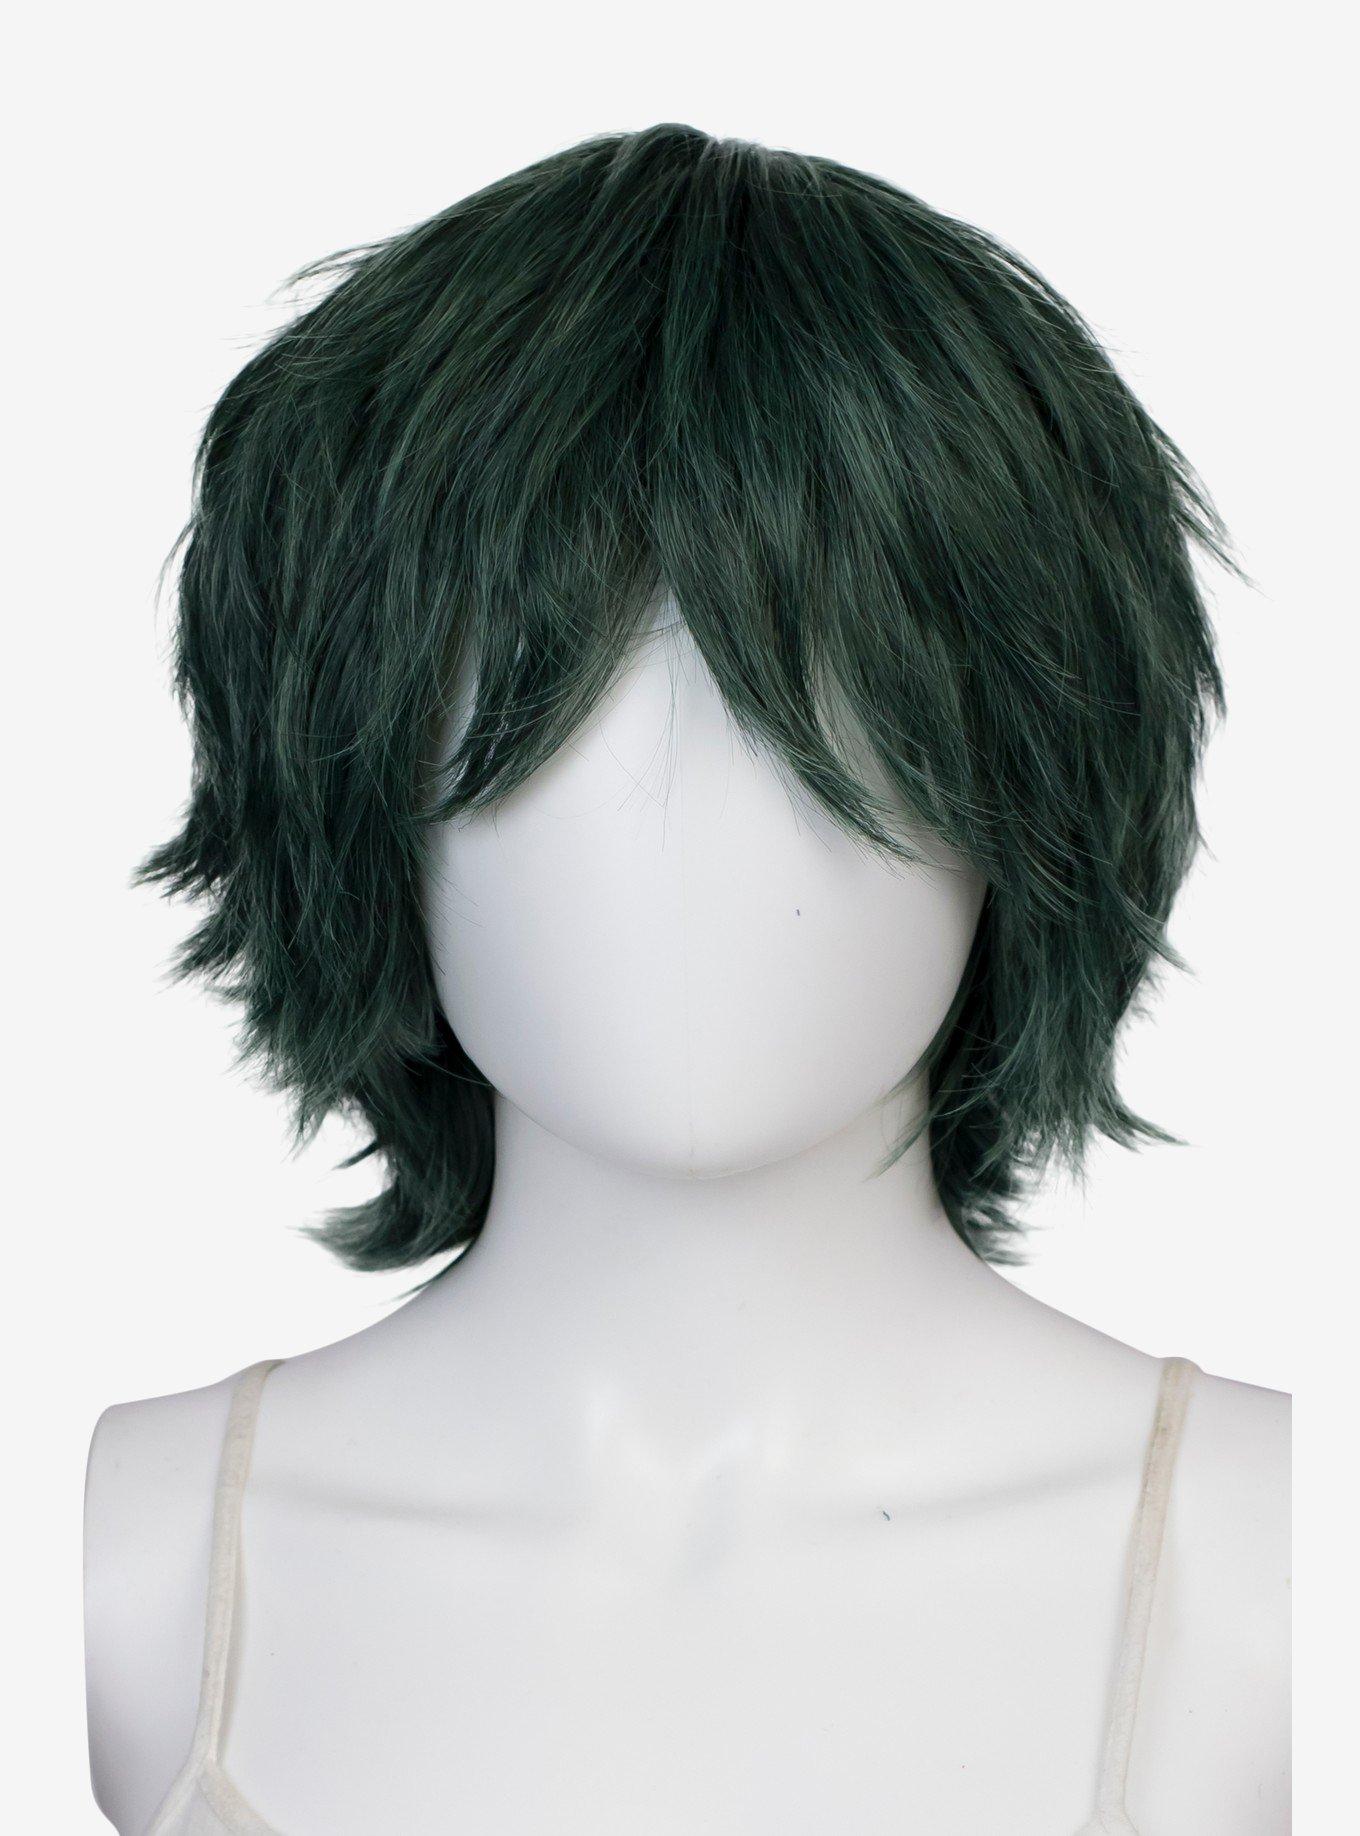 Epic Cosplay Apollo Forest Green Mix Shaggy Wig for Spiking , , hi-res